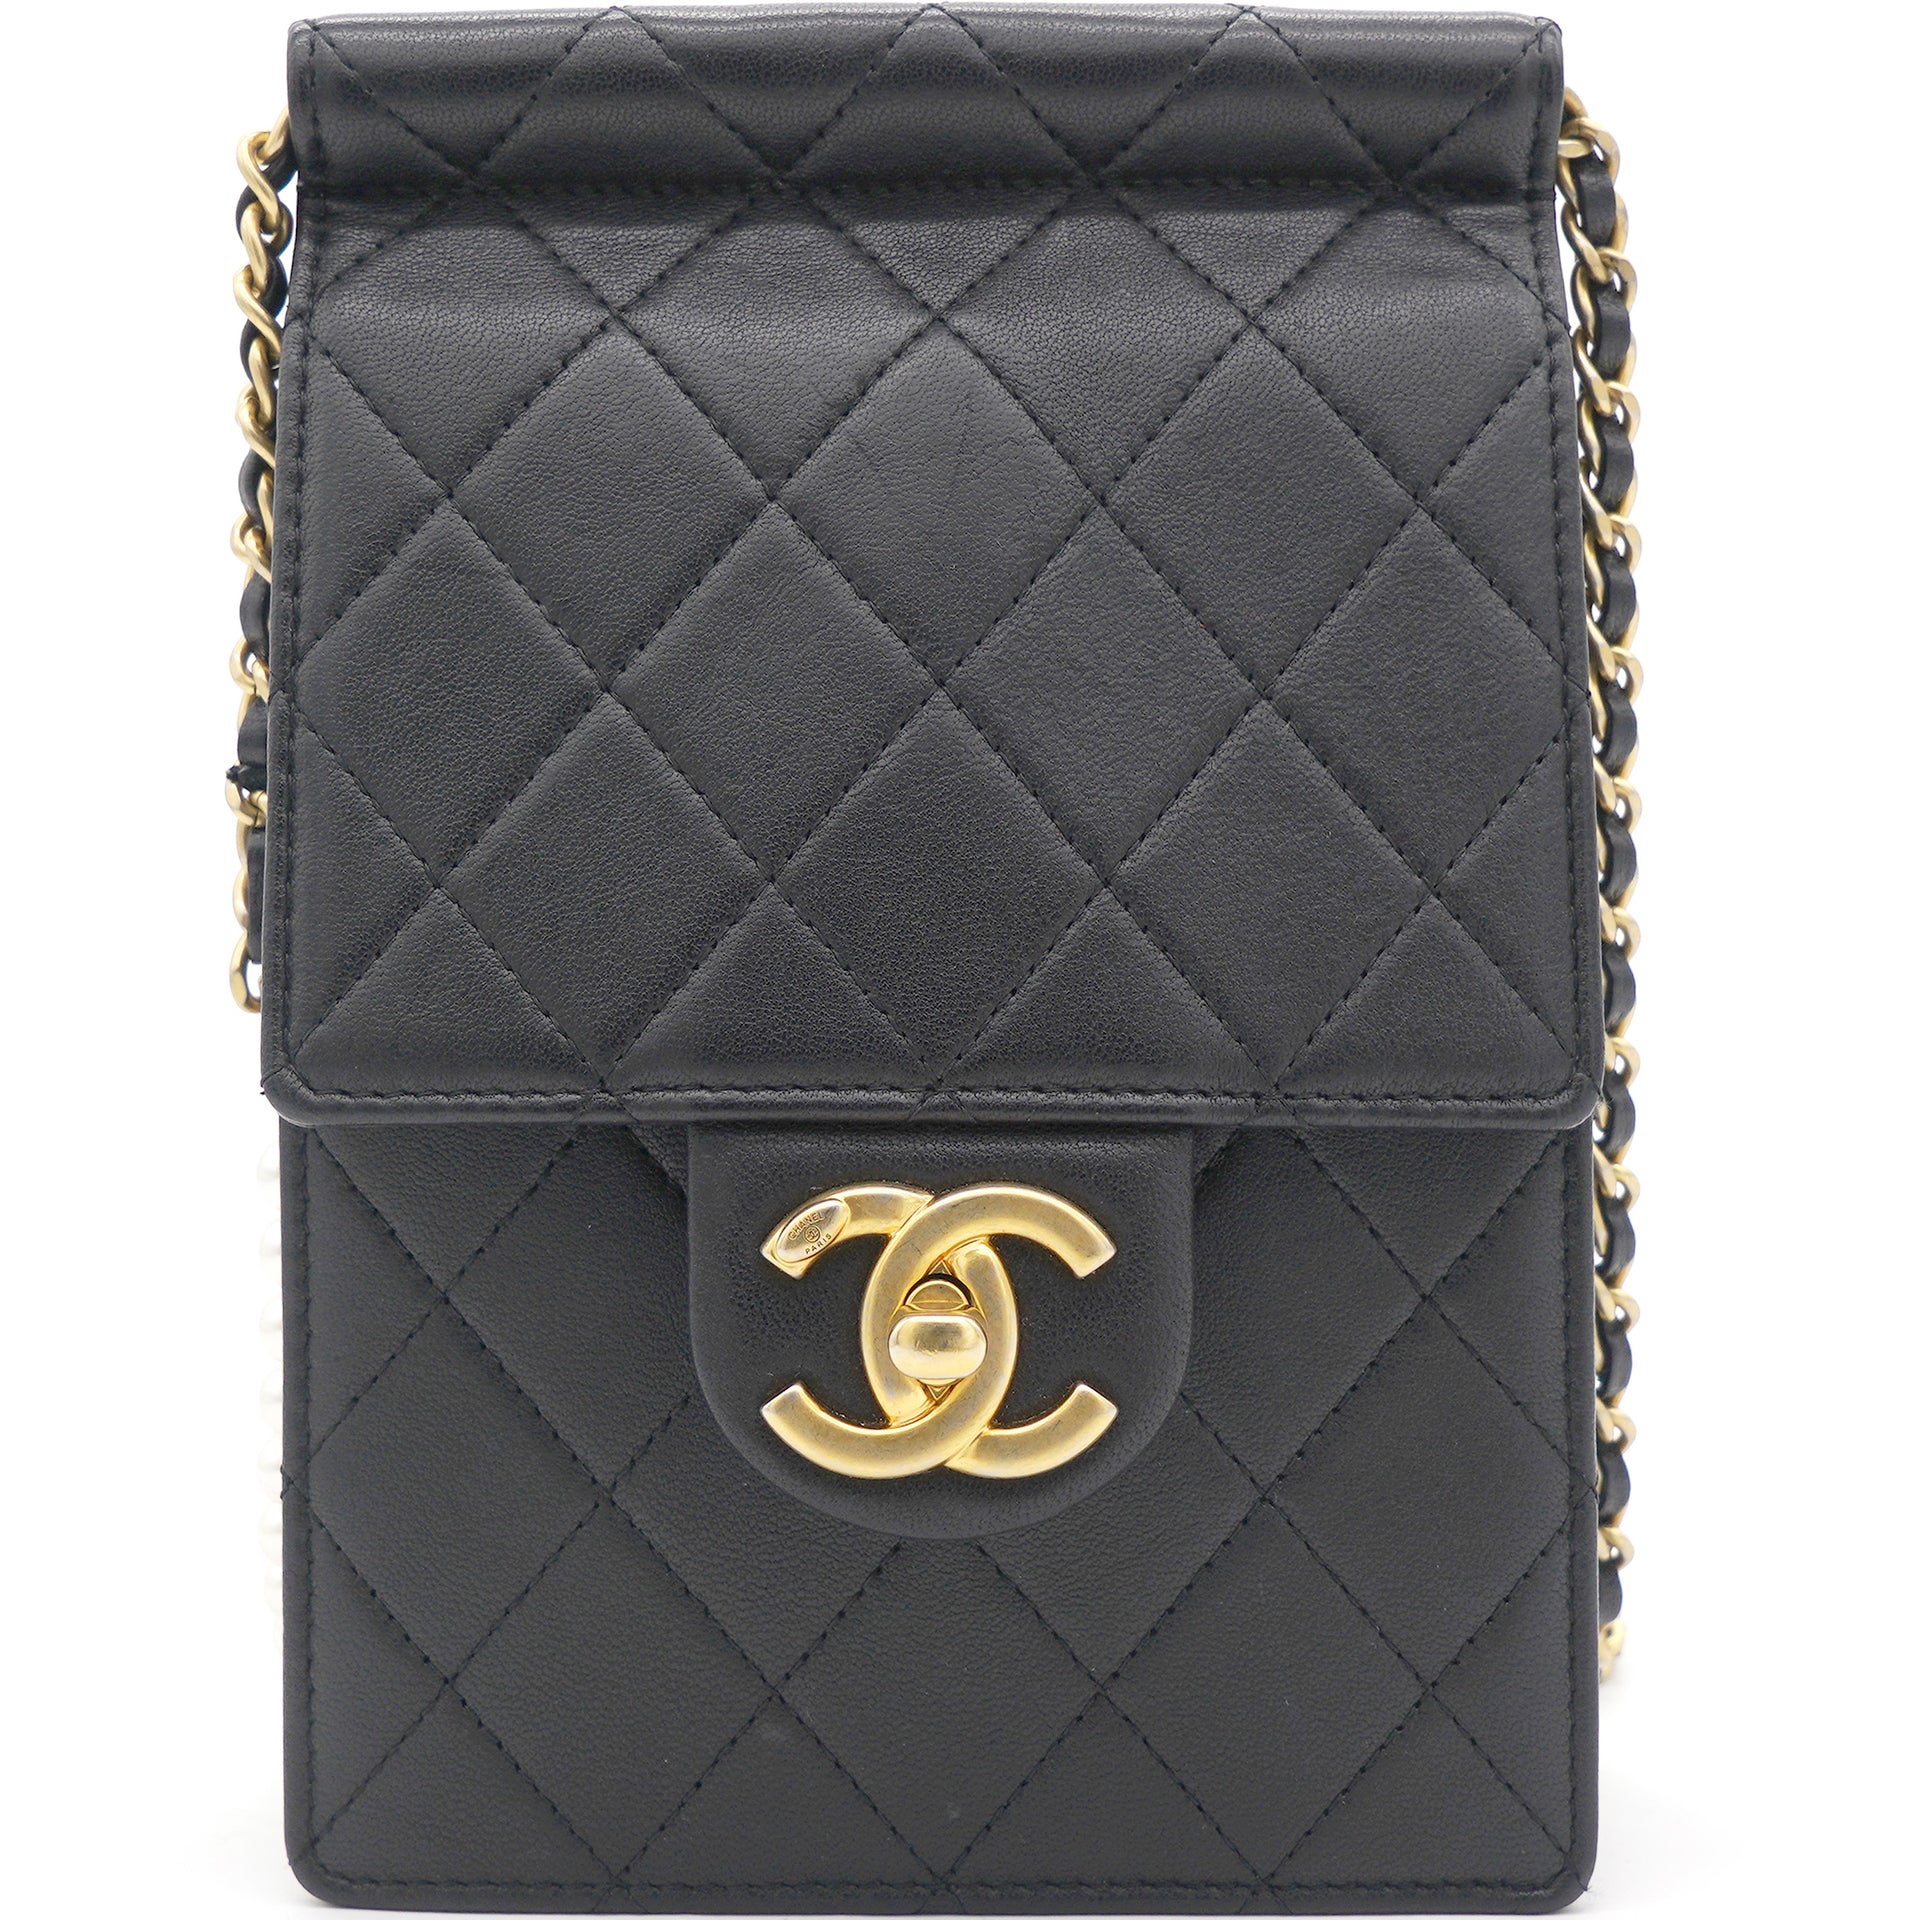 Chanel Mini Flap Bag With Pearl And Woven Chain CC Logo Black